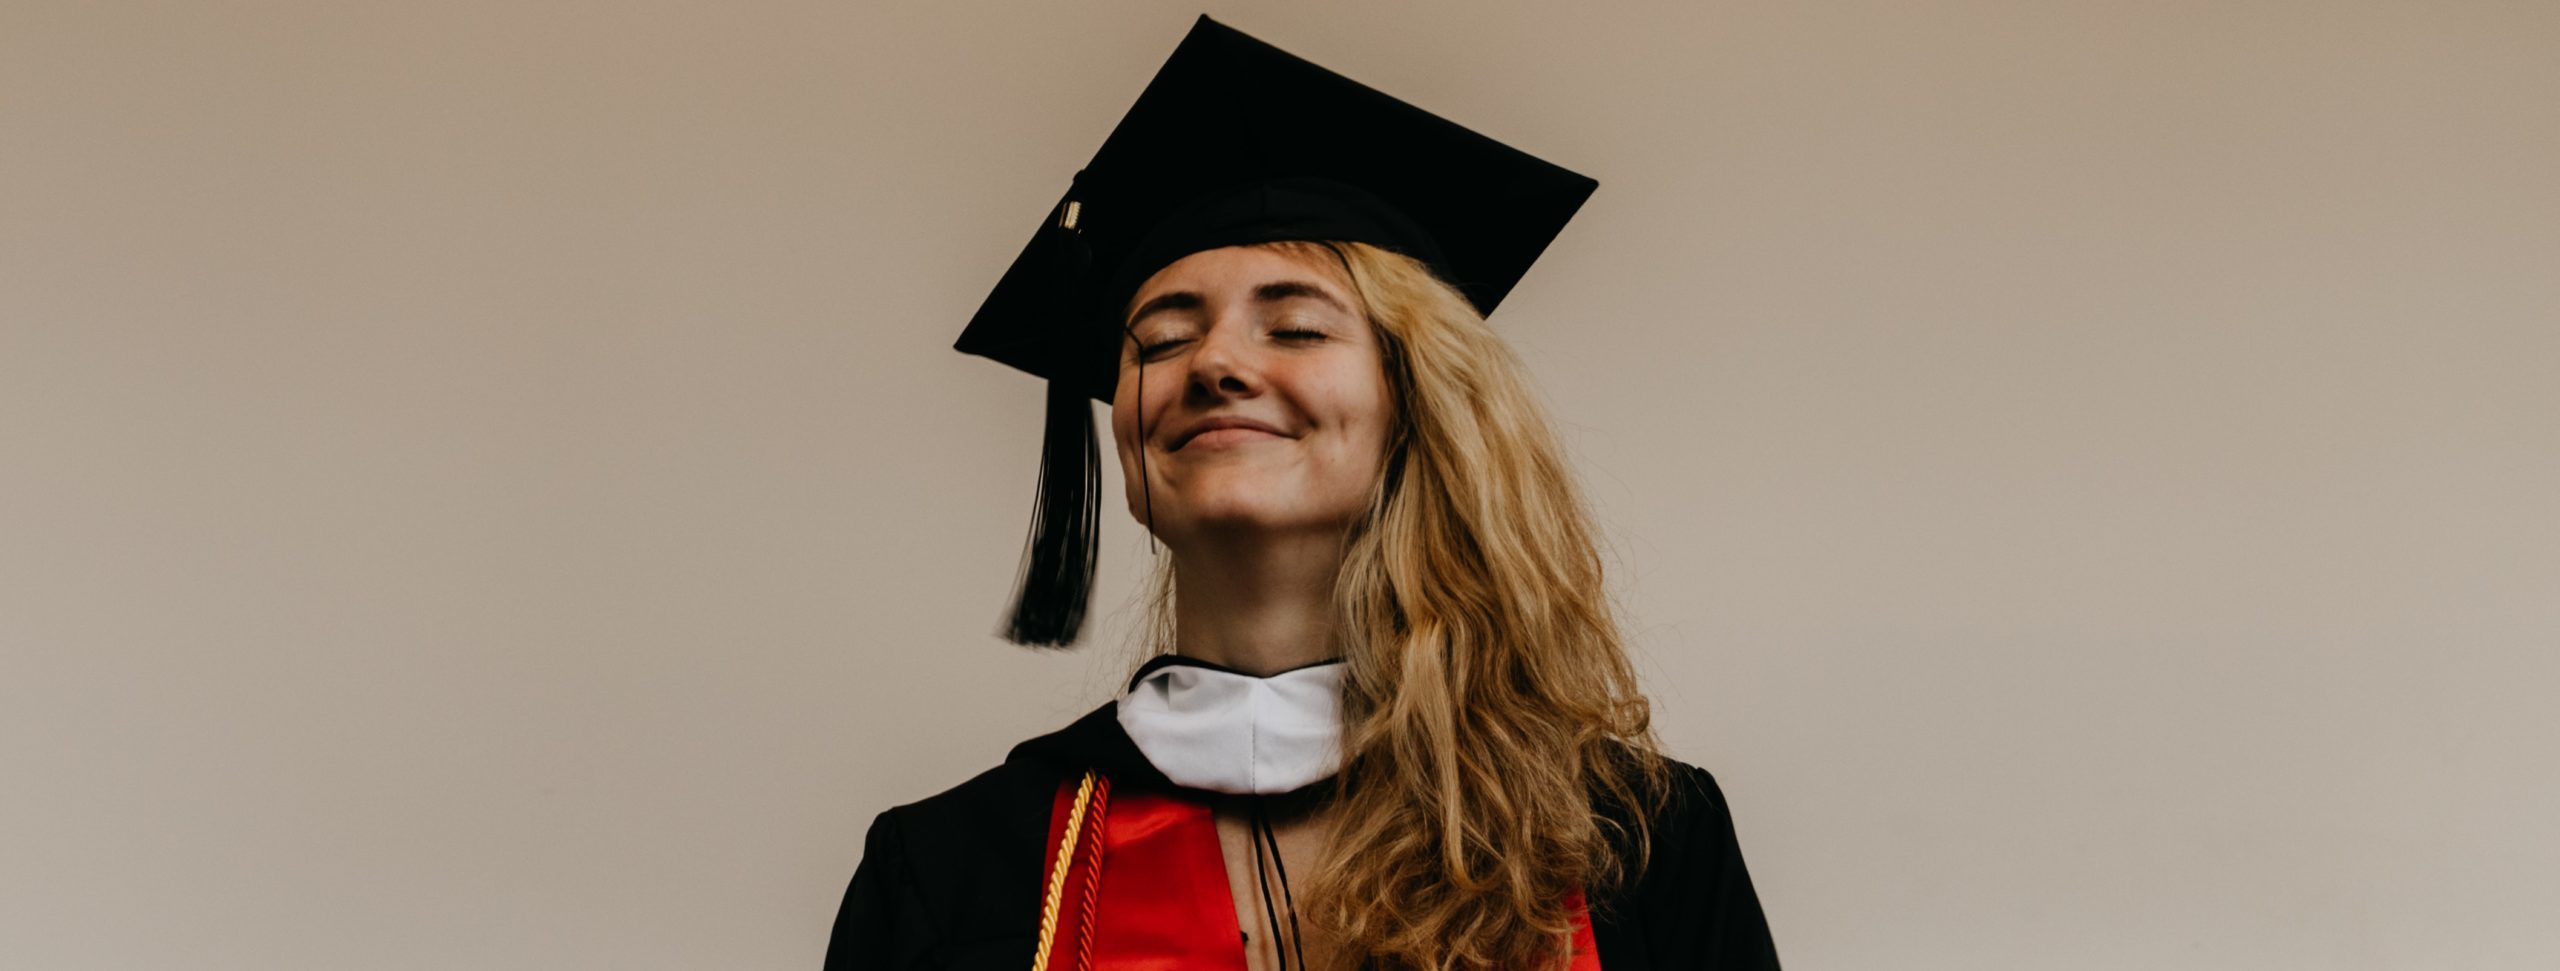 smiling woman in graduation gown and cap